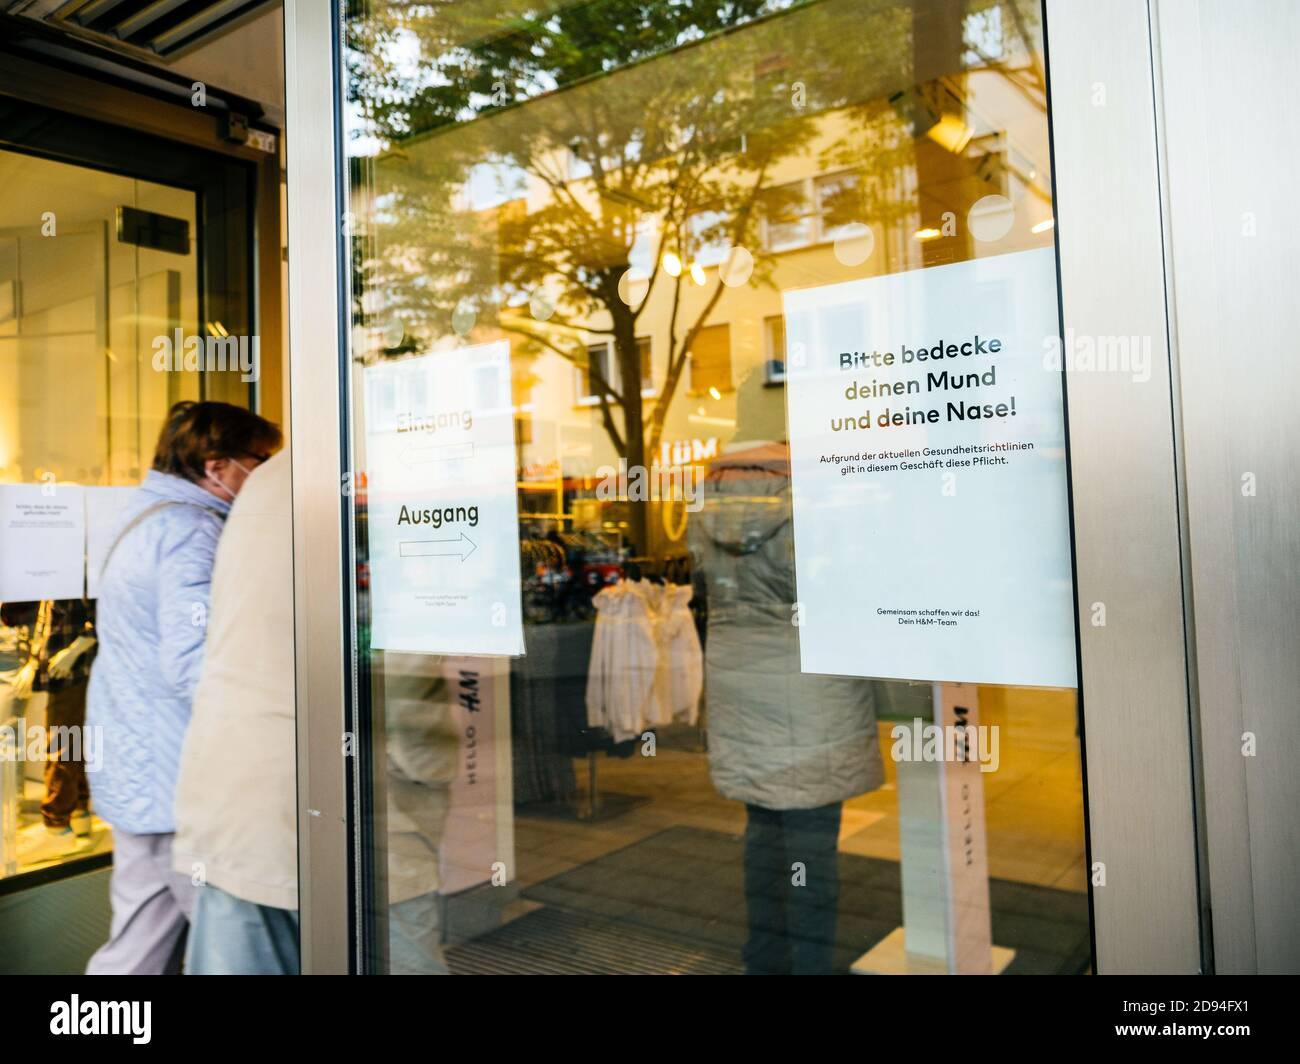 Kehl, Germany - Oct 16, 2020: People entering H and M store with  inscription at the entrance